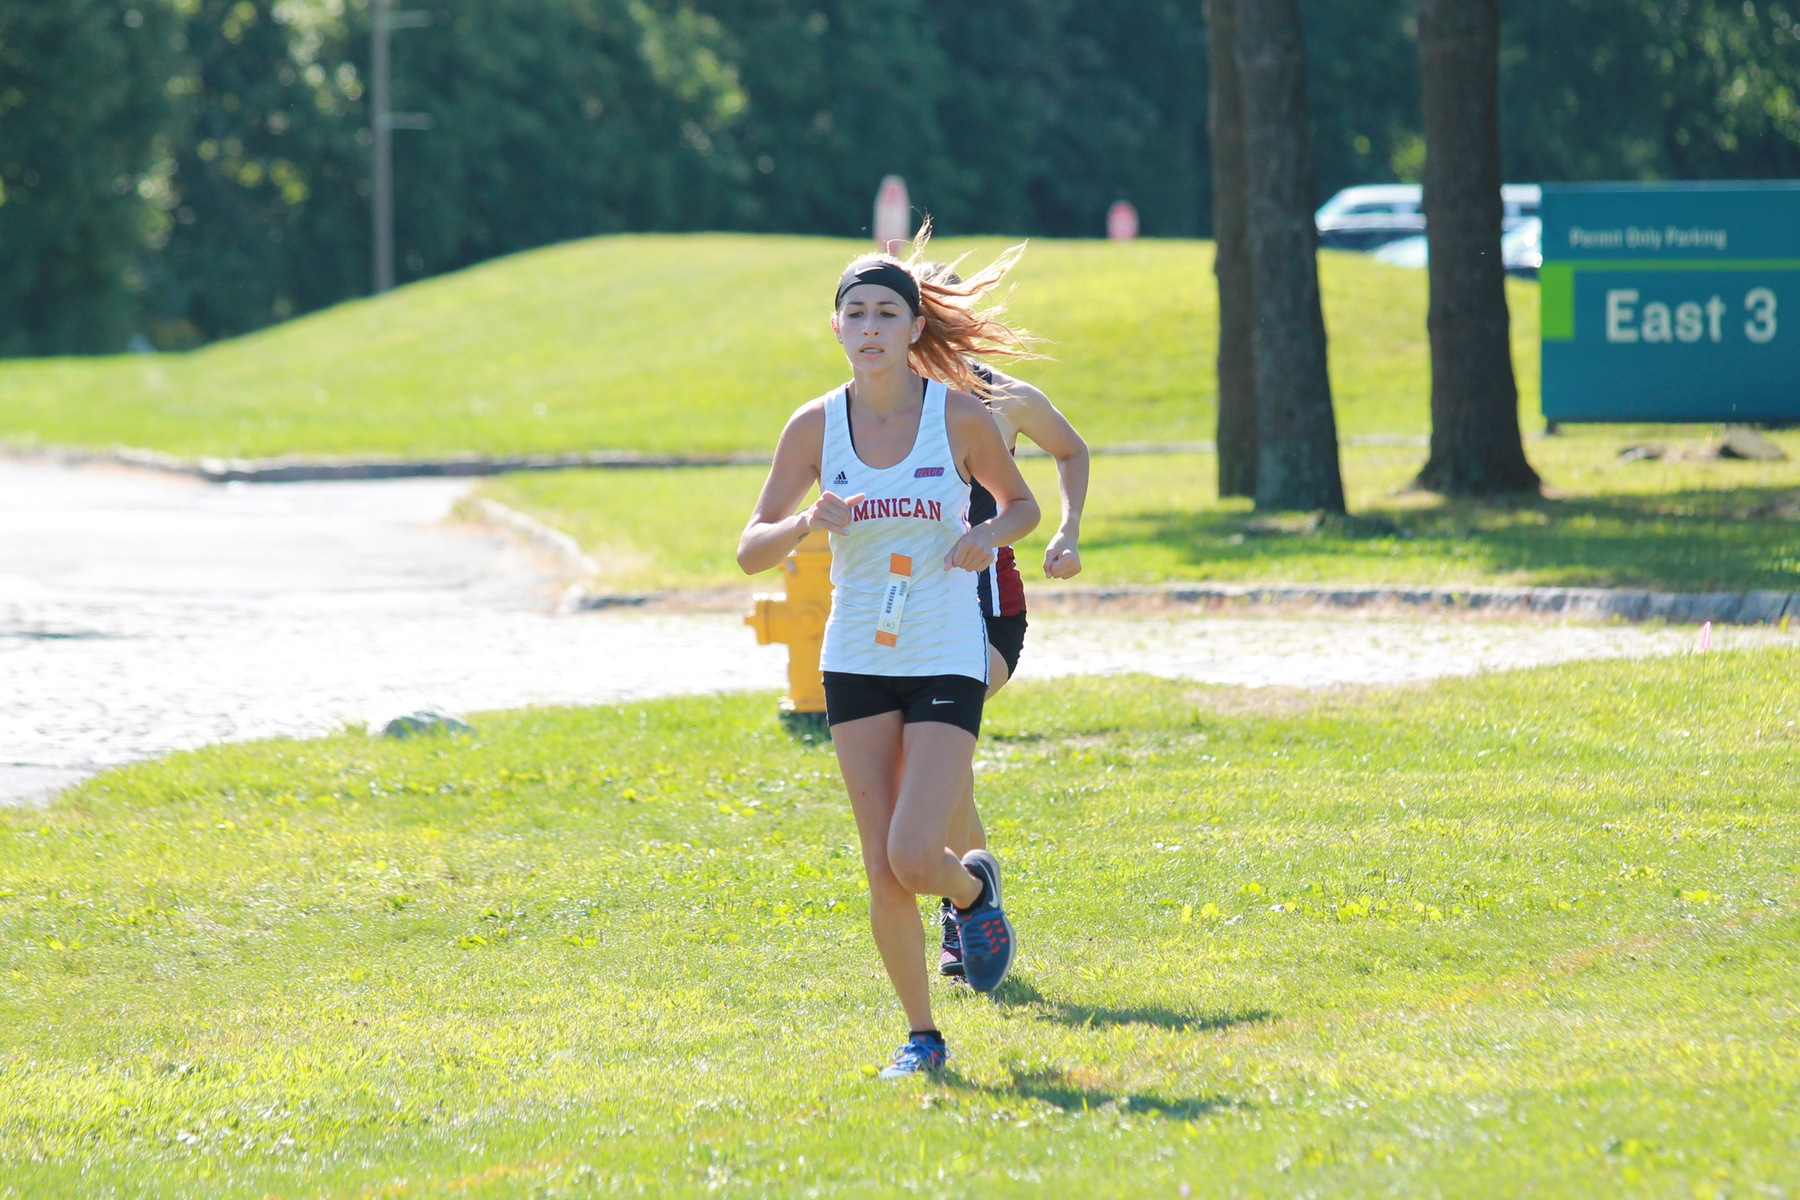 WOMEN'S CROSS COUNTRY FINISH NINTH AT MOUNT SAINT MARY COLLEGE CROSS COUNTRY INVITATIONAL